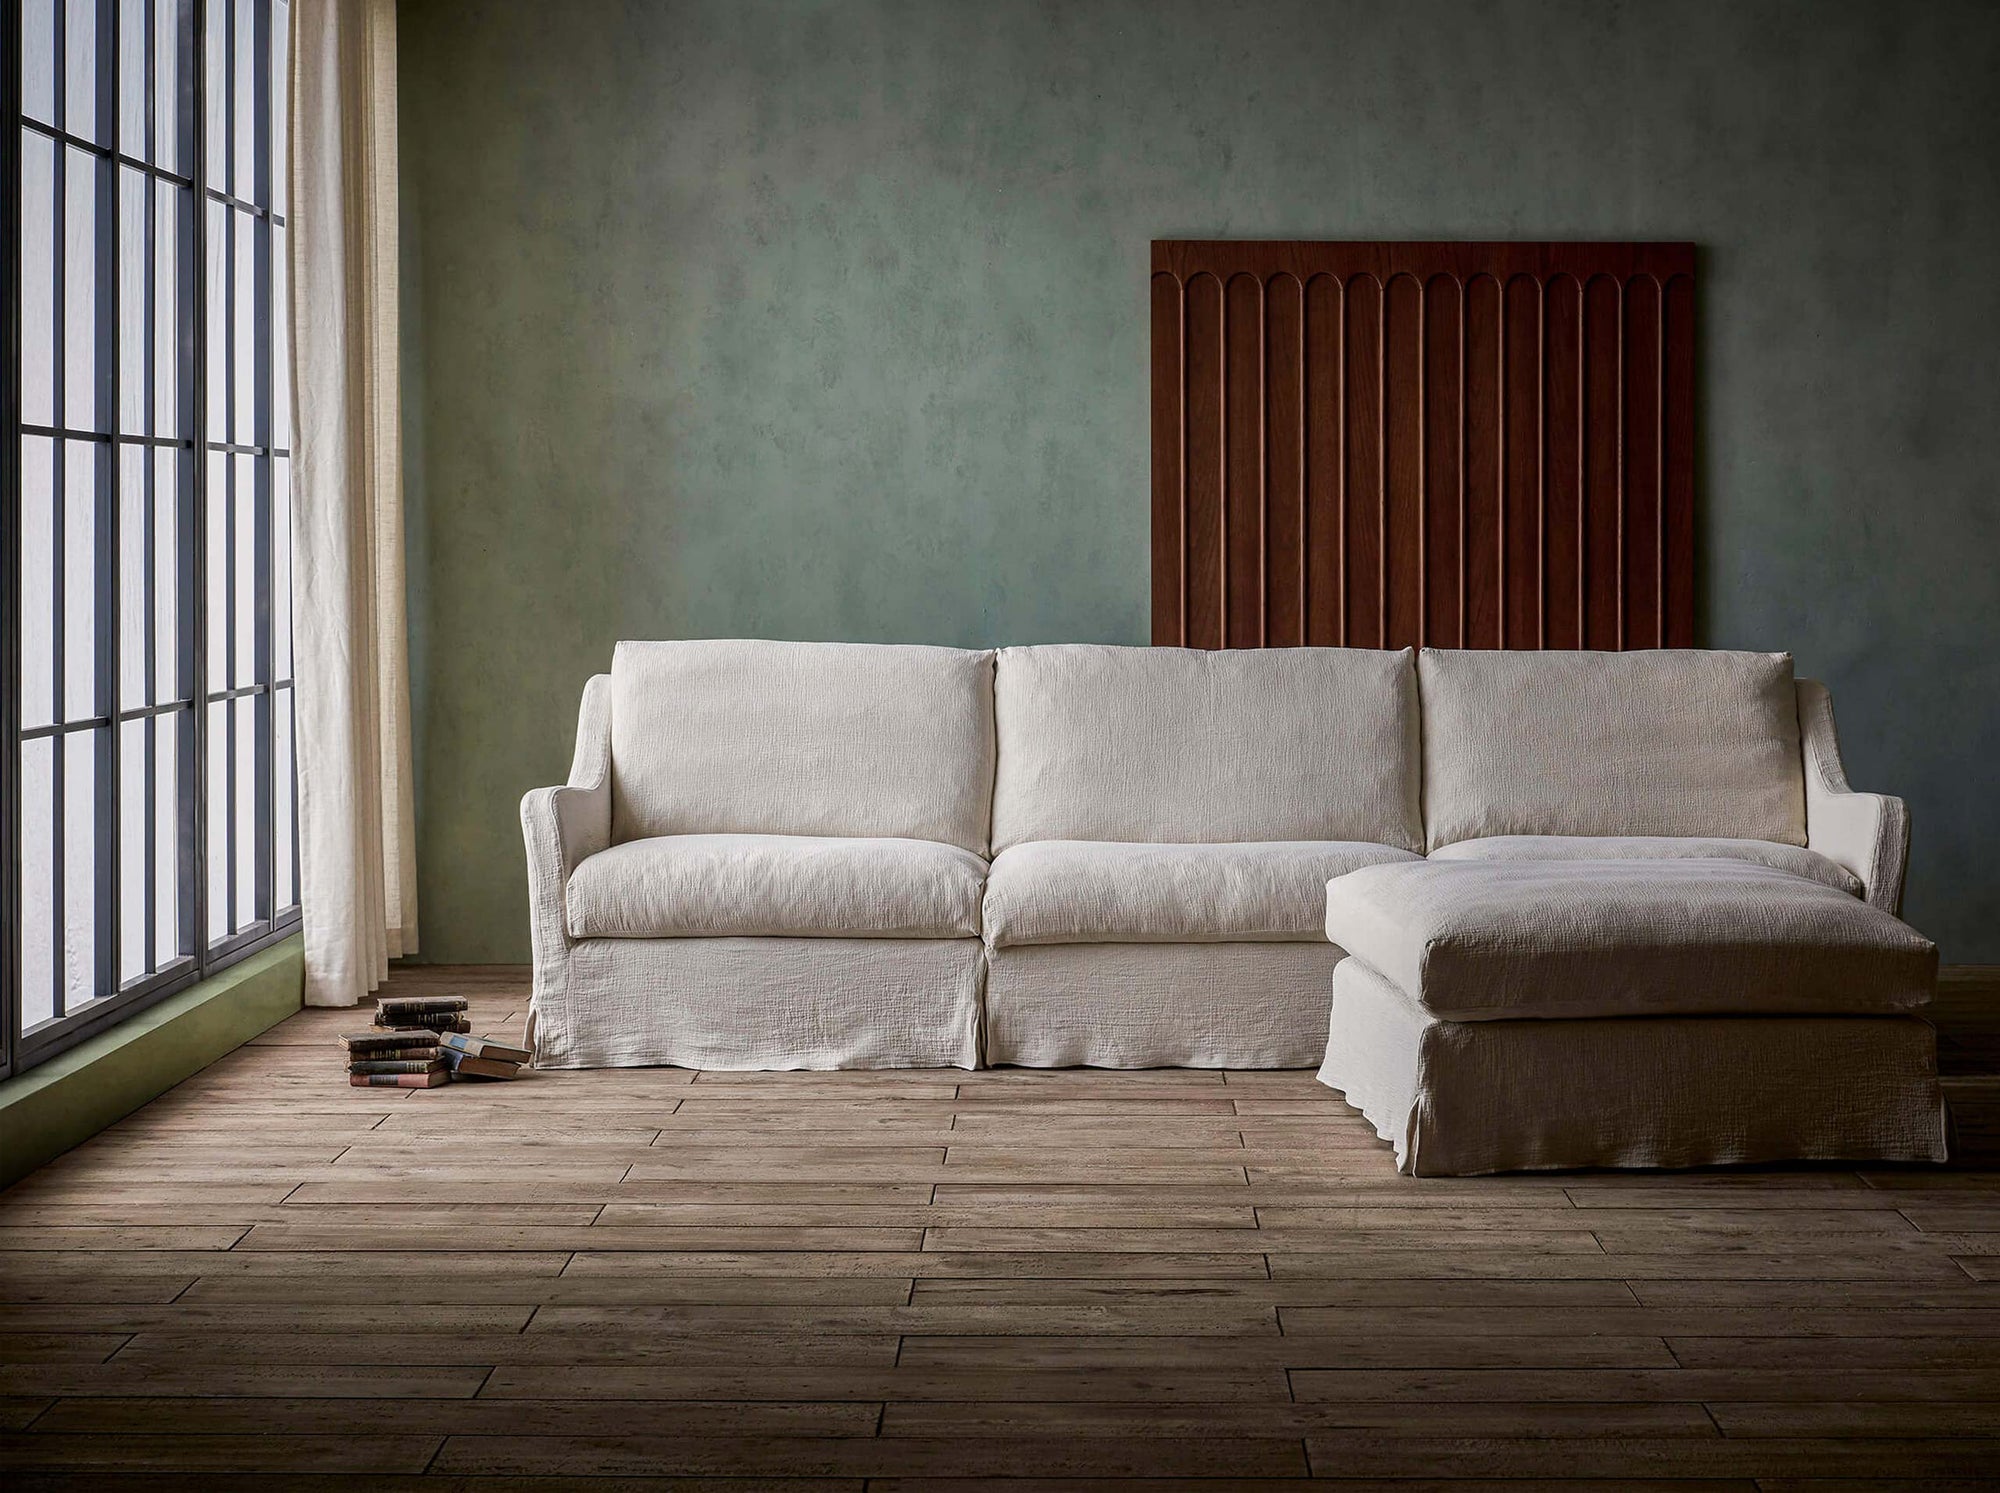 Esmé 4-piece Chaise Sectional Sofa in Corn Silk, a light beige Washed Cotton Linen, placed next to a window in a room